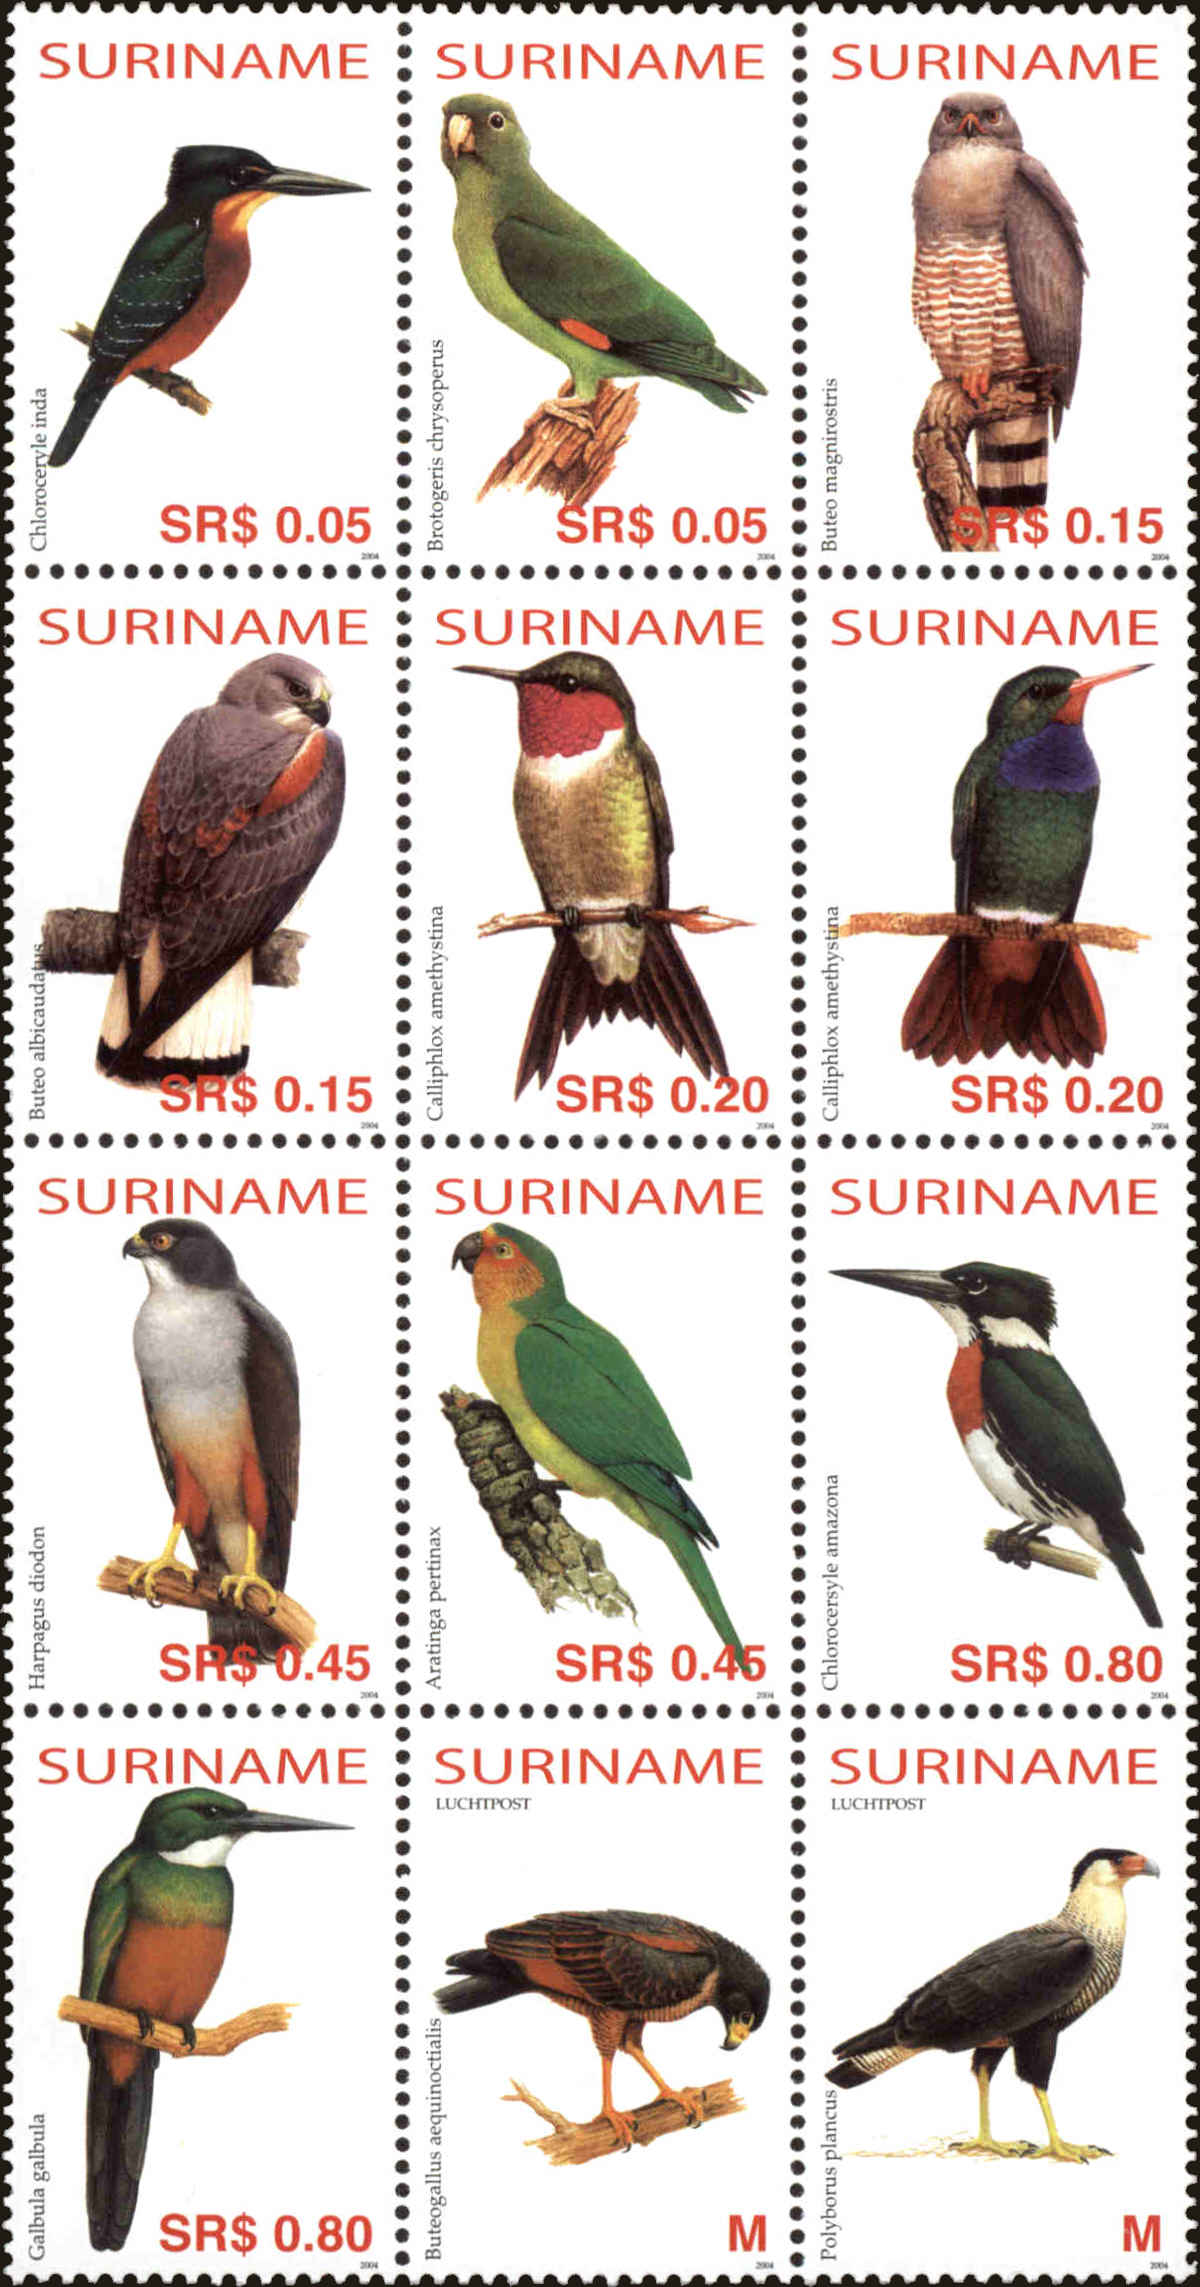 Front view of Surinam 1318 collectors stamp